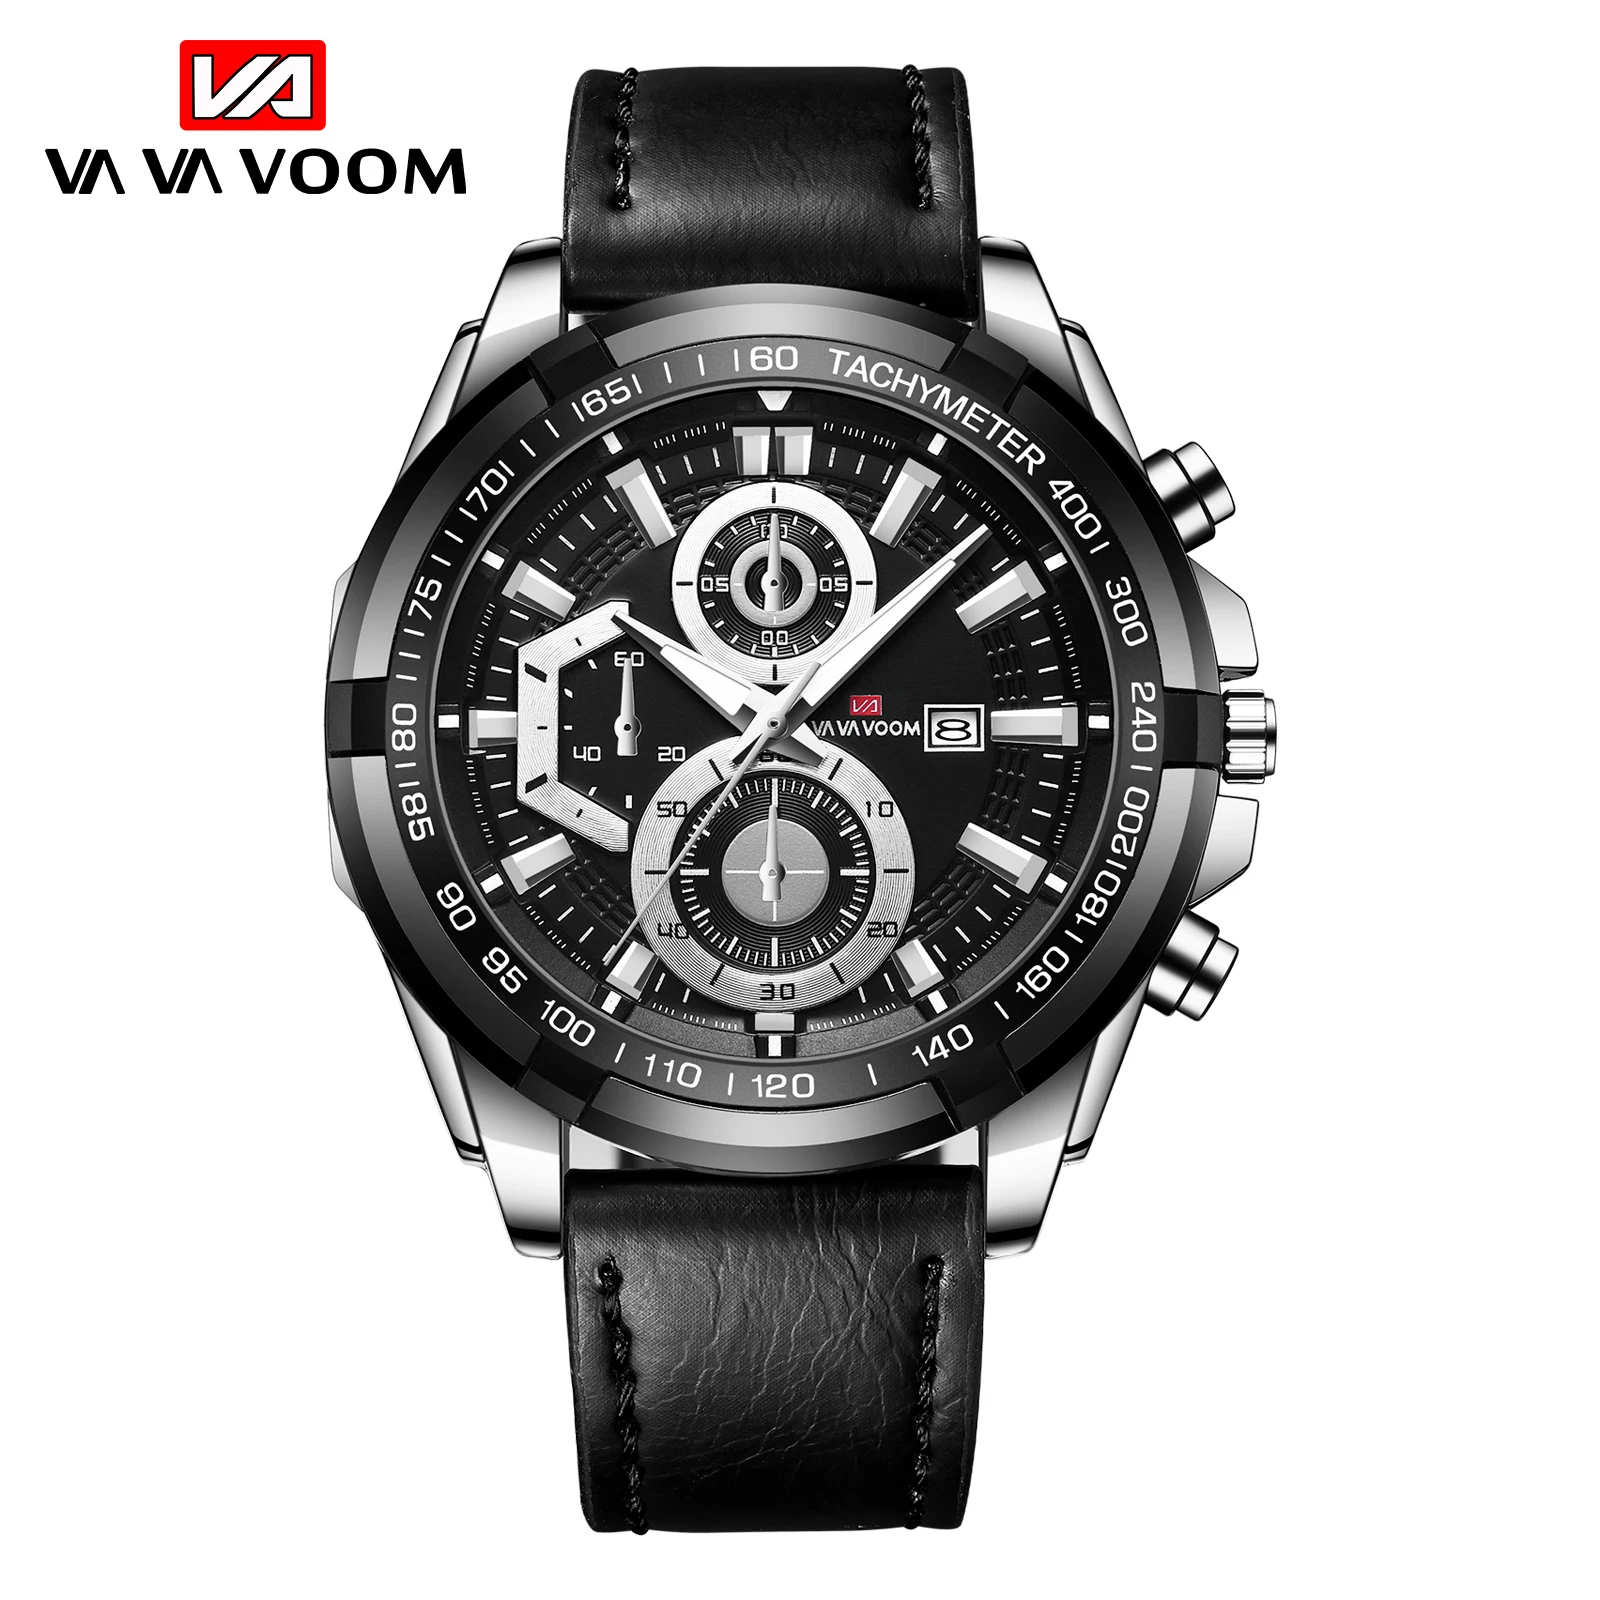 

VAVA VOOM New Fashion Men's Sport Watch Classic Super Big Dial Stainless Steel Waterproof Casual Wrist Watches With Calendar